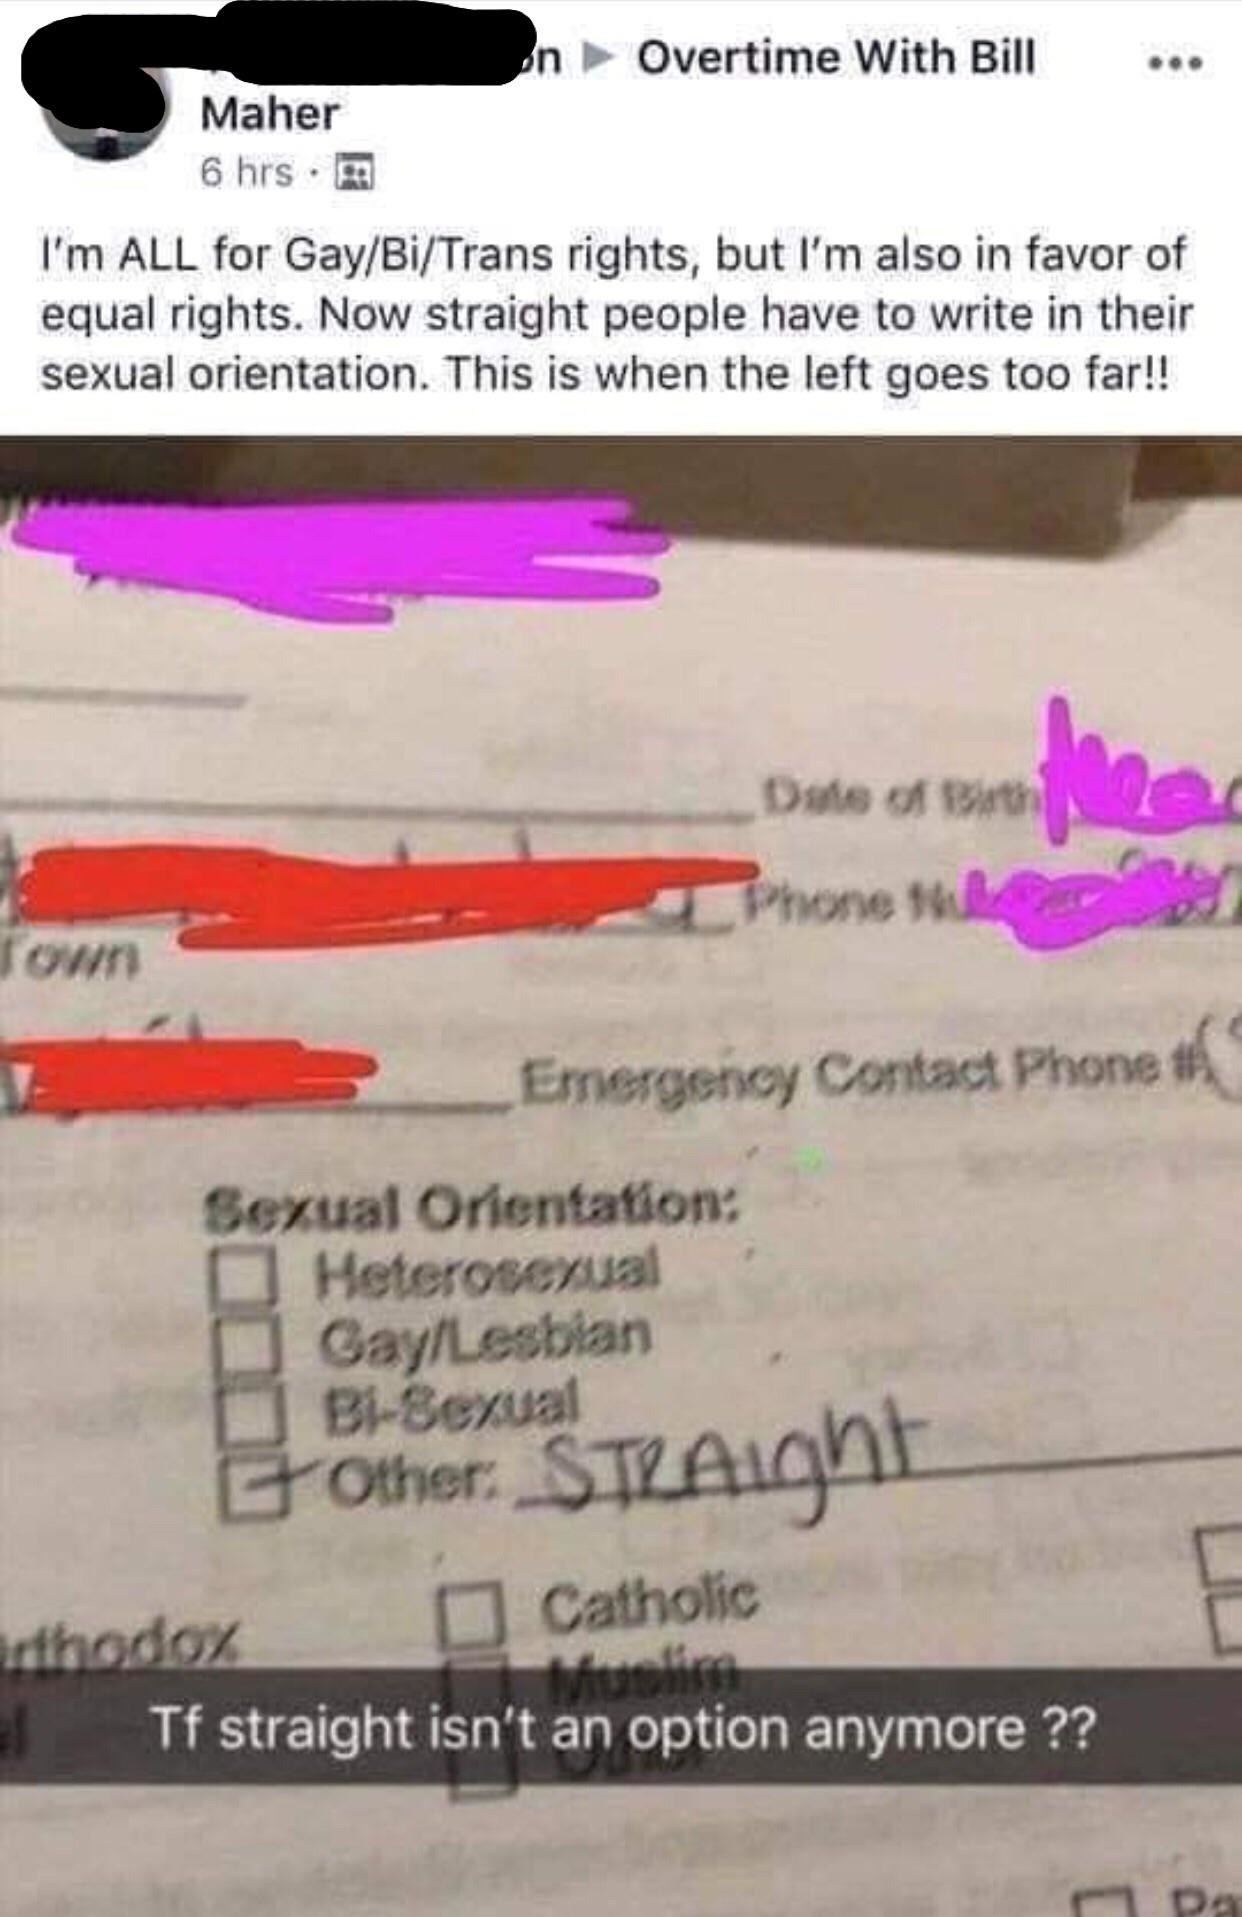 Facebook post of someone posting a form asking sexual orientation and they&#x27;re mad &quot;straight&quot; isn&#x27;t an option but it says heterosexual